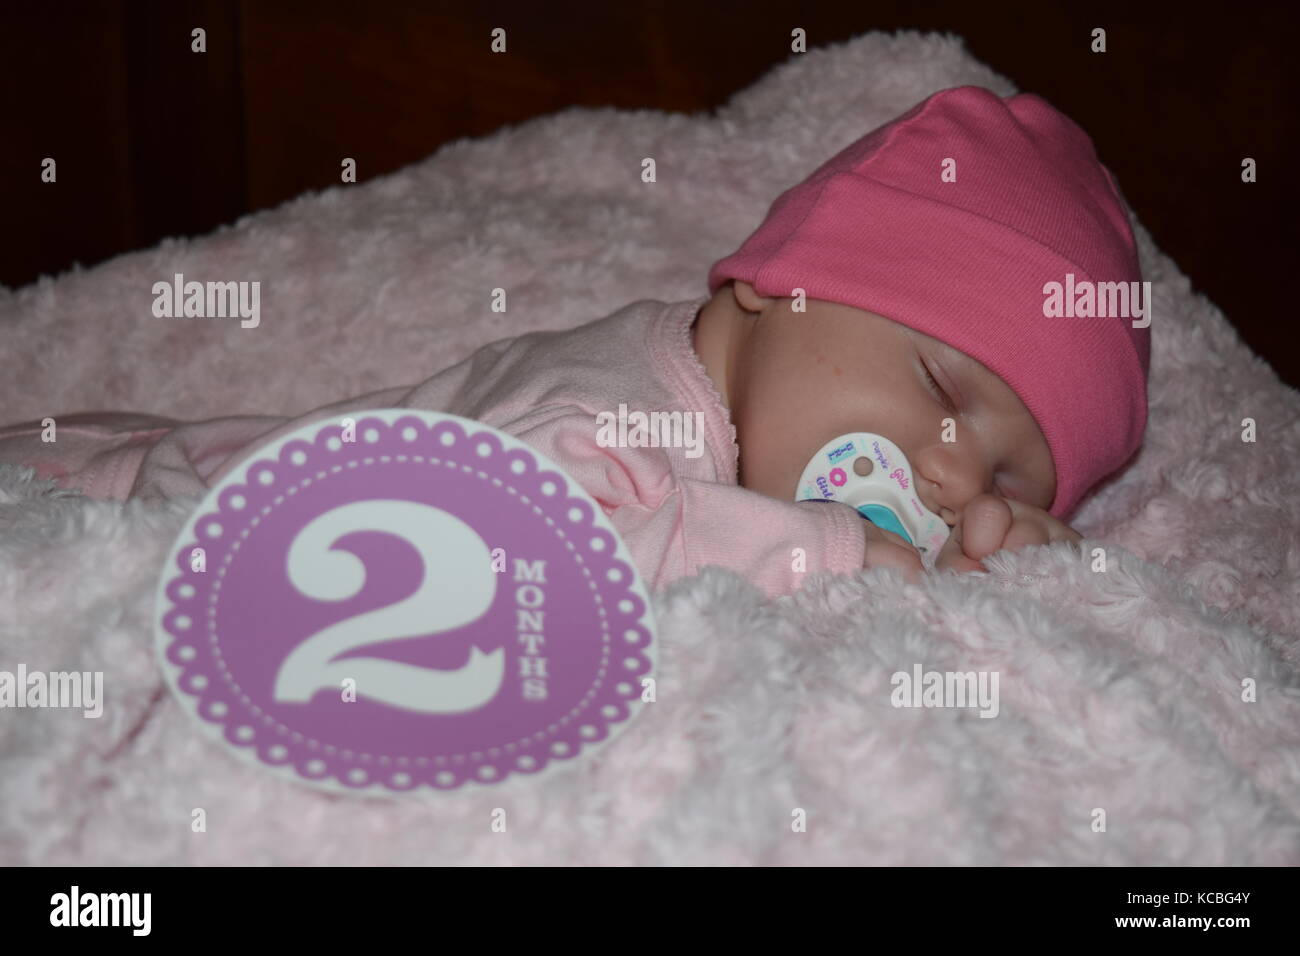 2 month old baby Stock Photo - Alamy